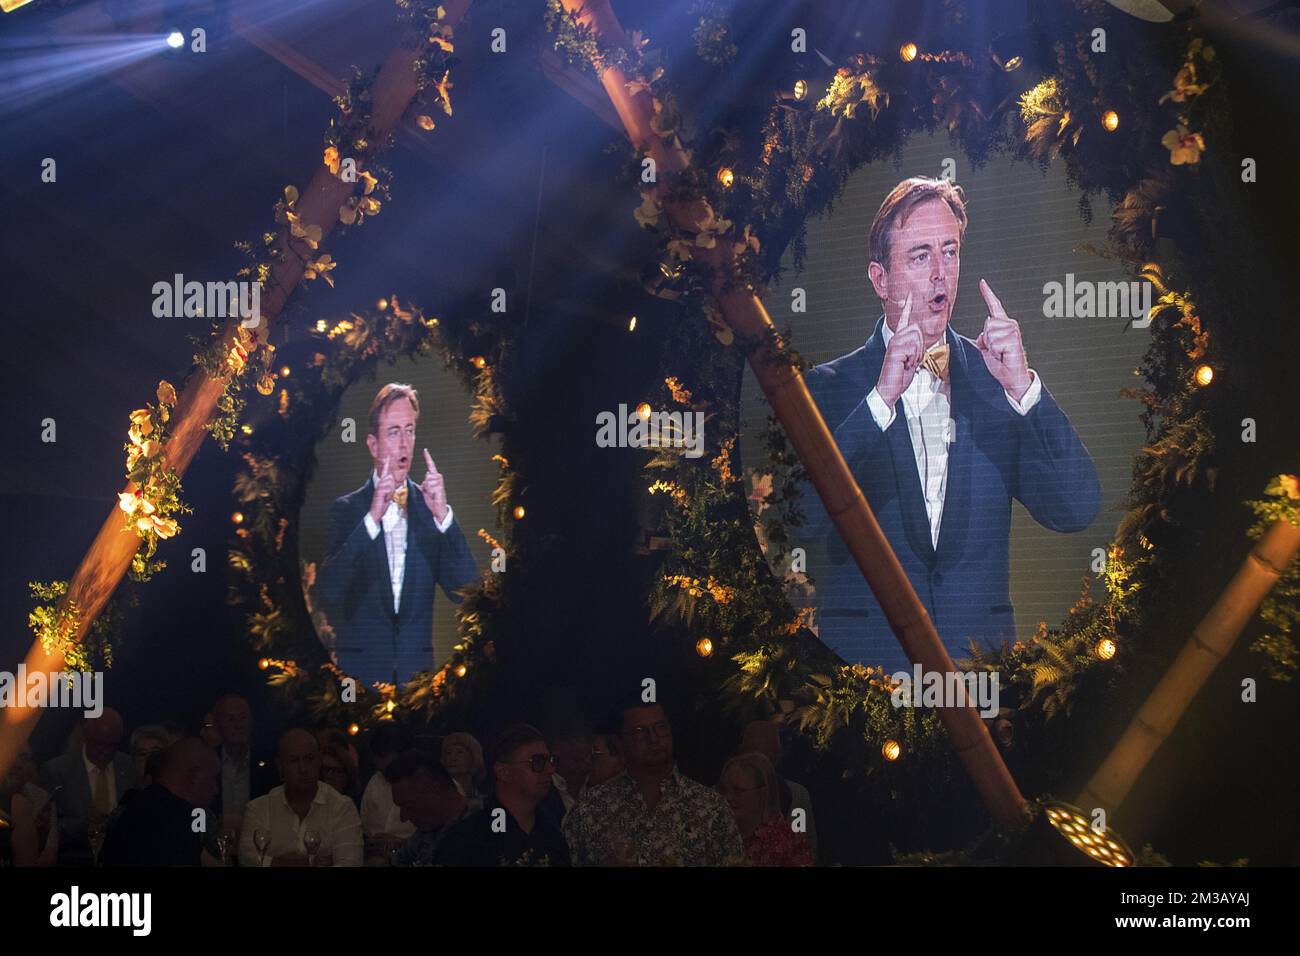 N-VA chairman Bart De Wever delivers a speech at the 'zomerfeest' summer party meeting of conservative Flemish nationalist party N-VA, Saturday 02 July 2022 in Mechelen. BELGA PHOTO NICOLAS MAETERLINCK Stock Photo